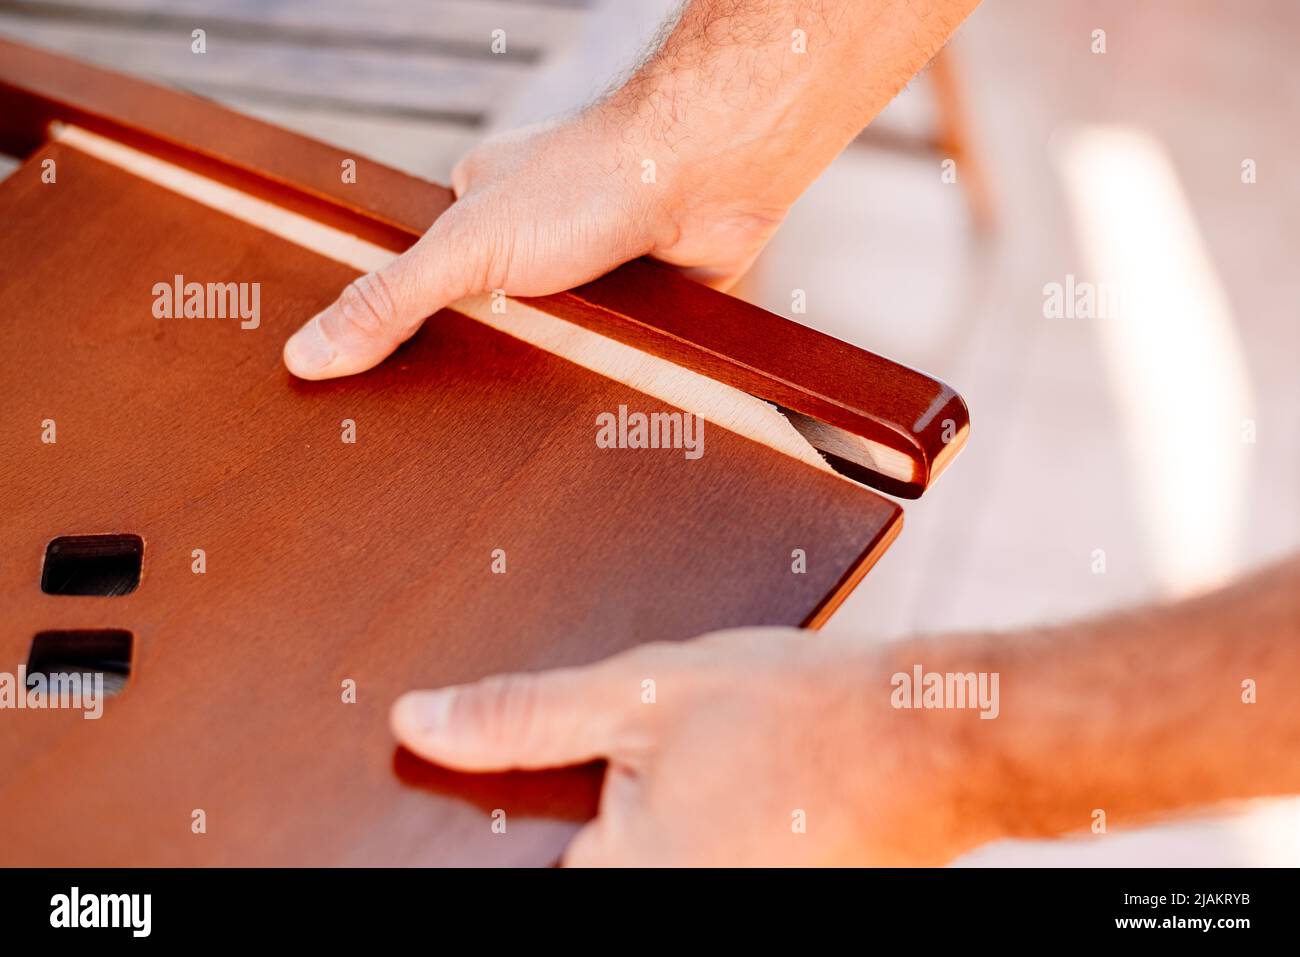 A carpenter's hands examines a chair with loose boards. Stock Photo